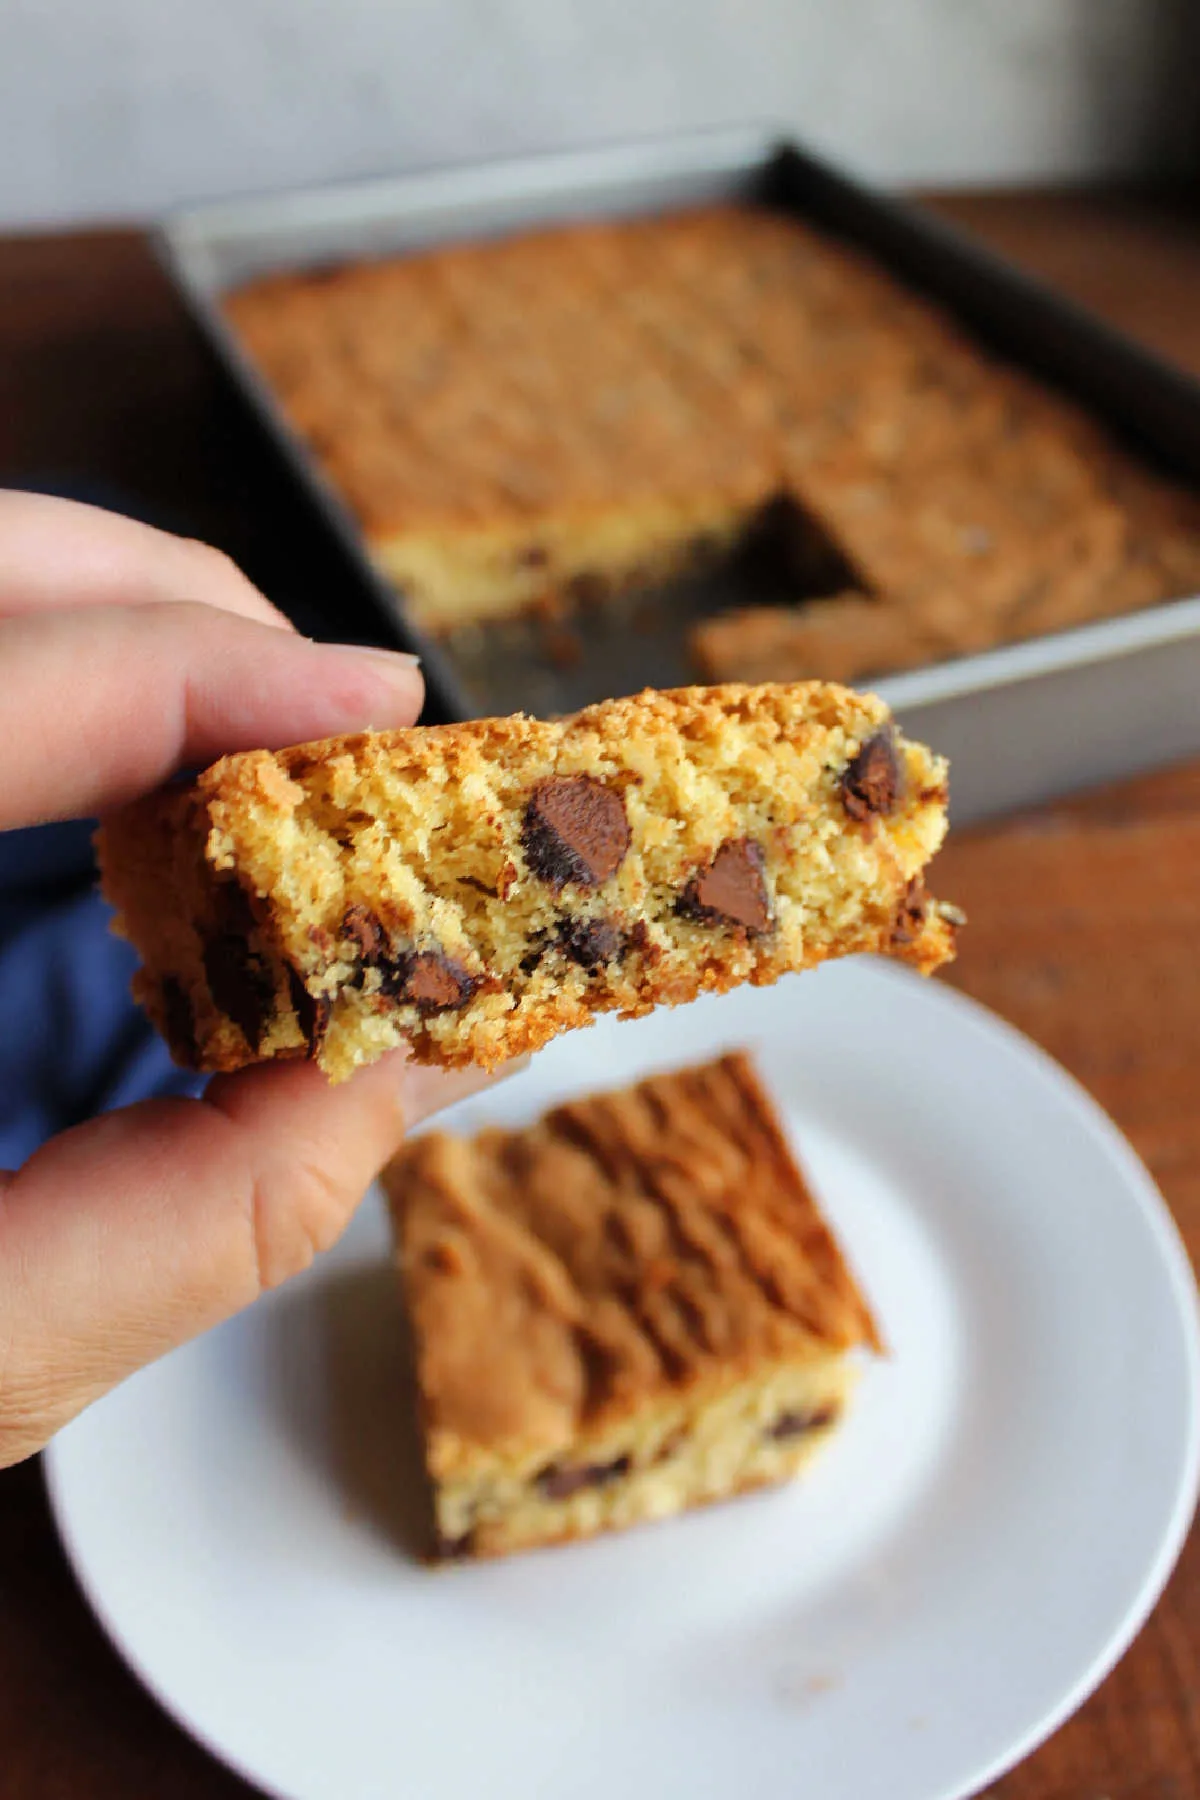 Hand holding chocolate chip brown sugar bar, ready to eat.